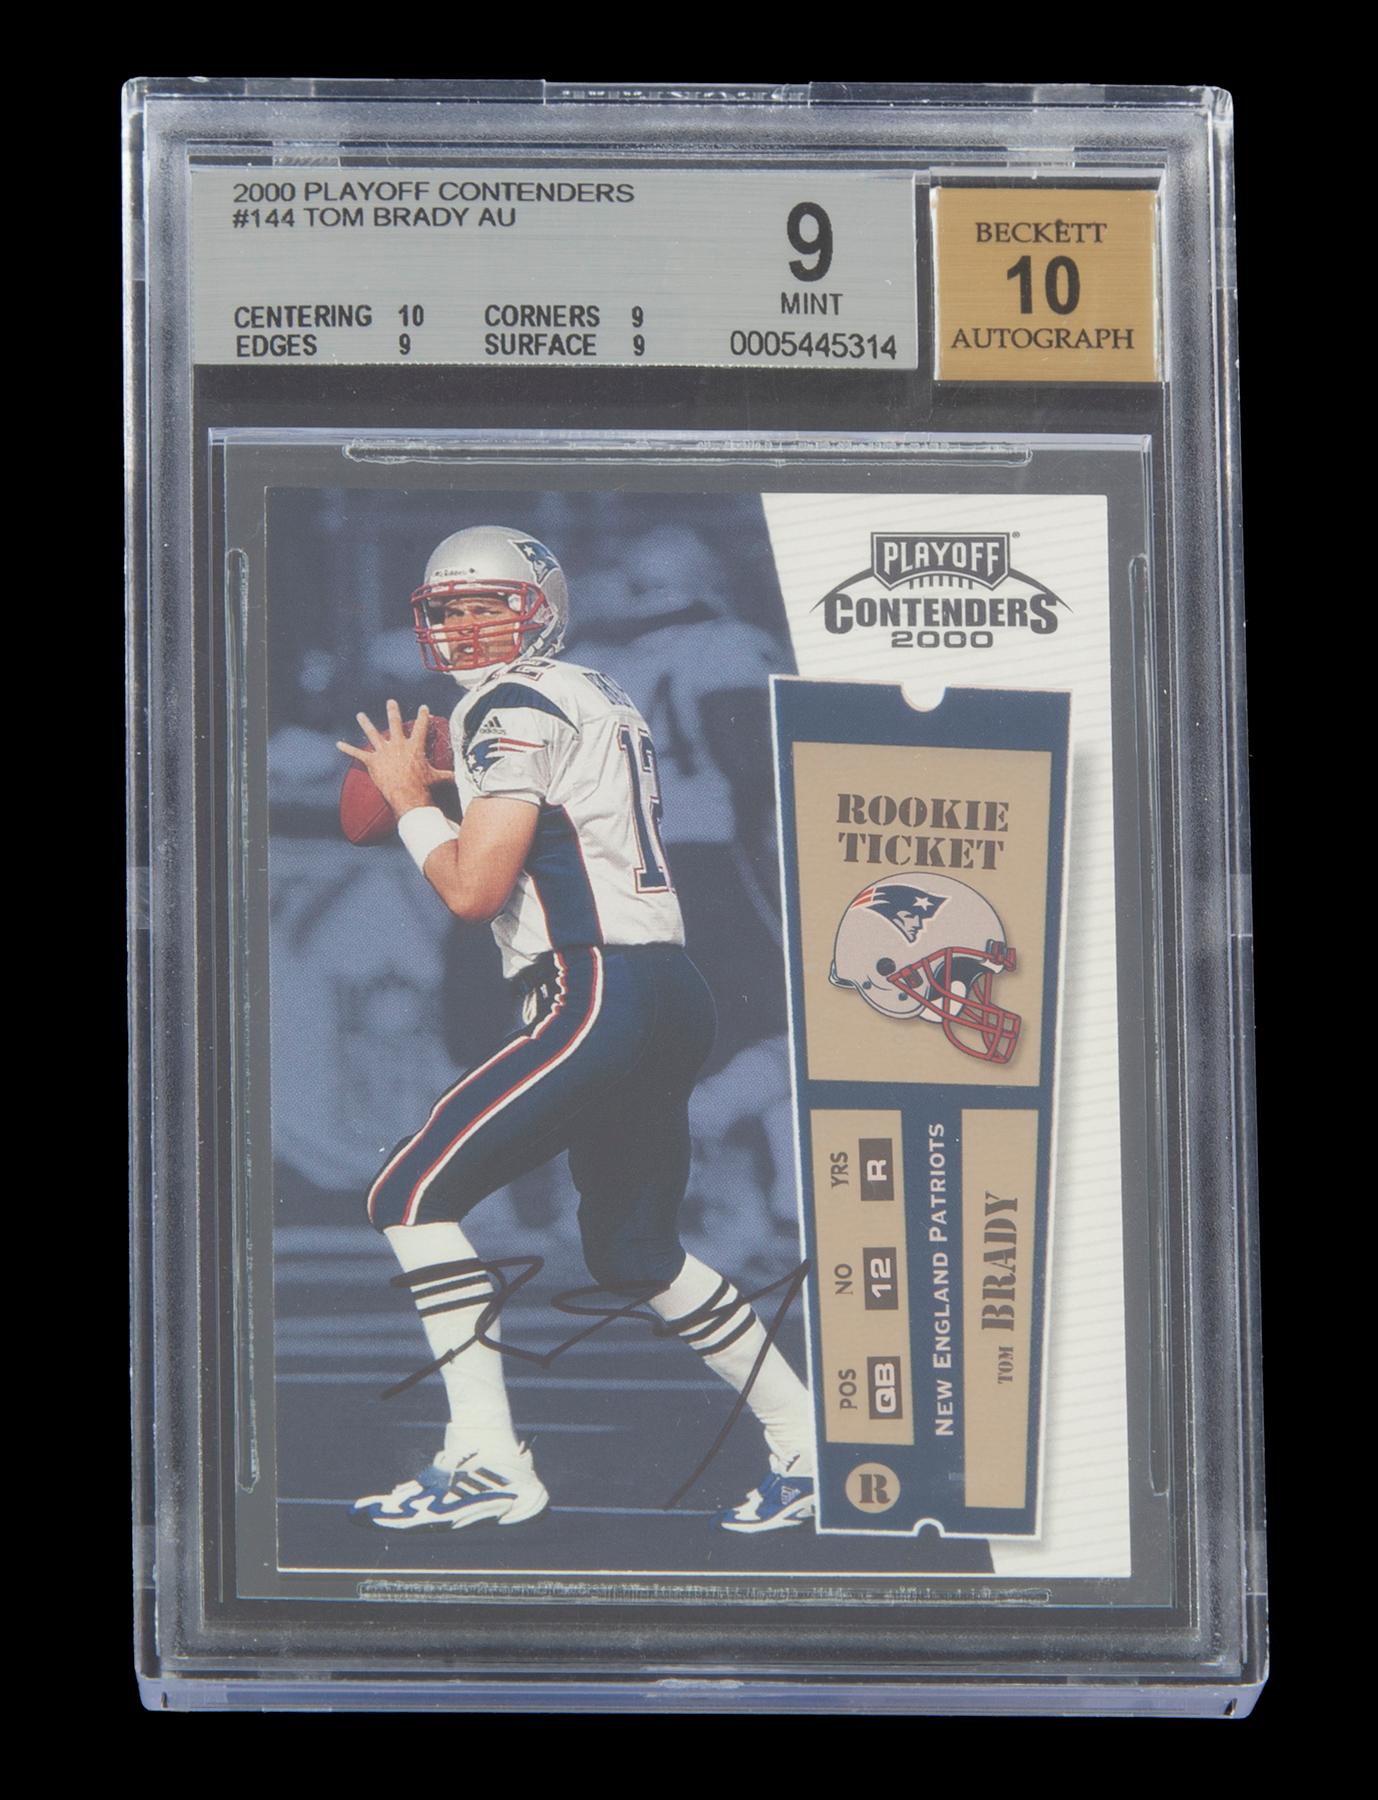 Tom Bradys rookie card set to fetch as much as $300,000 at auction as it joins slew of sports memorabilia from likes of Kobe Bryant and Michael Jordan at mega auction